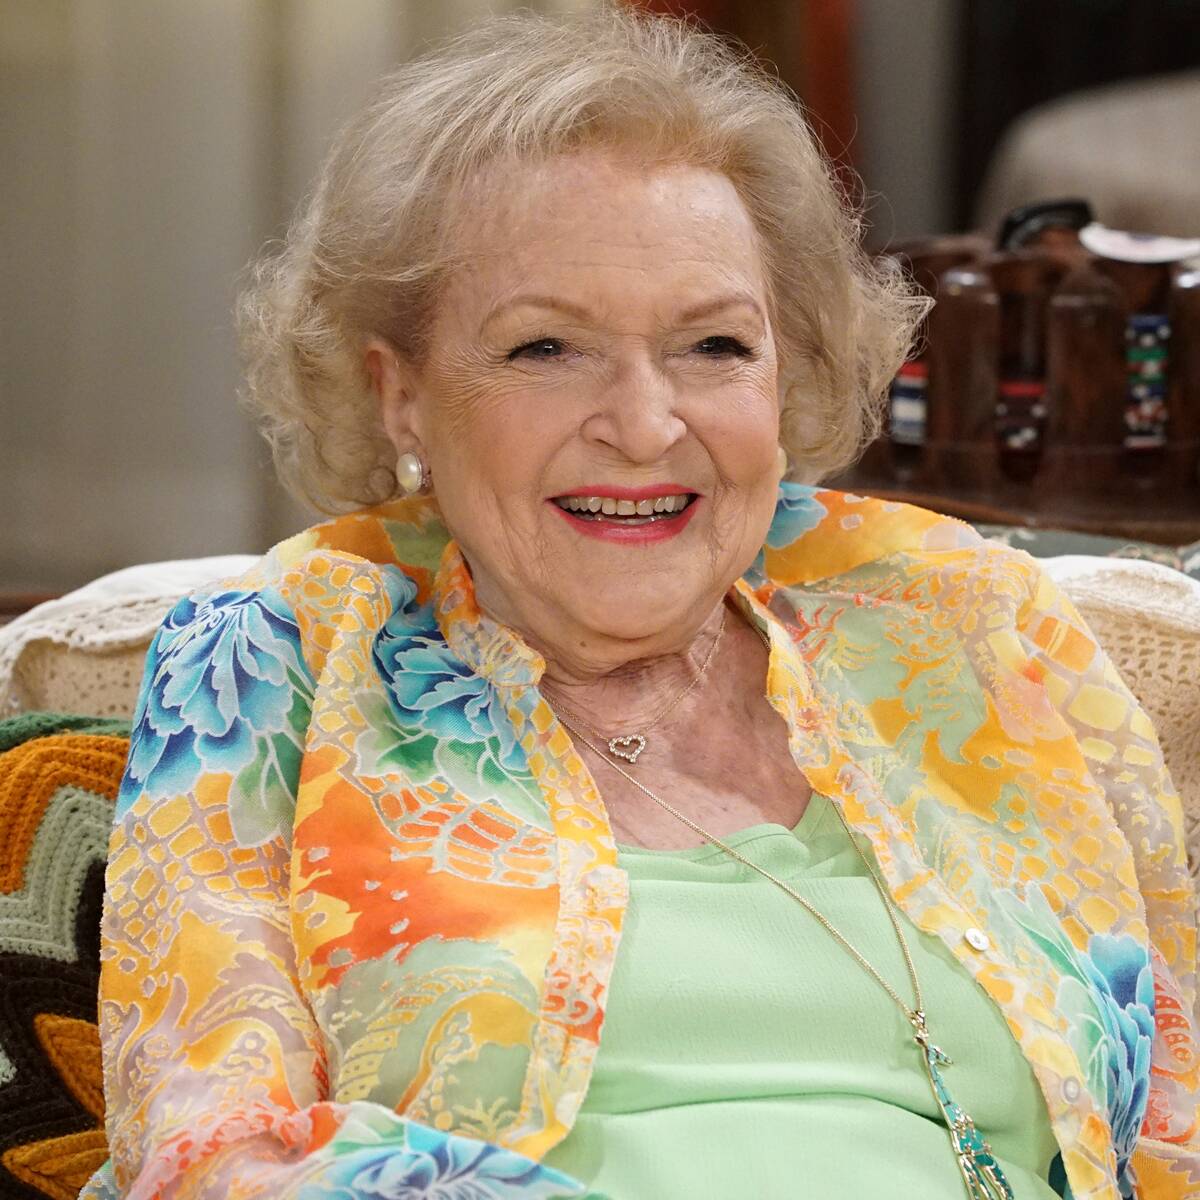 Betty White Celebrates Her 99th Birthday With the Re-Release of Her "Long-Lost Series"